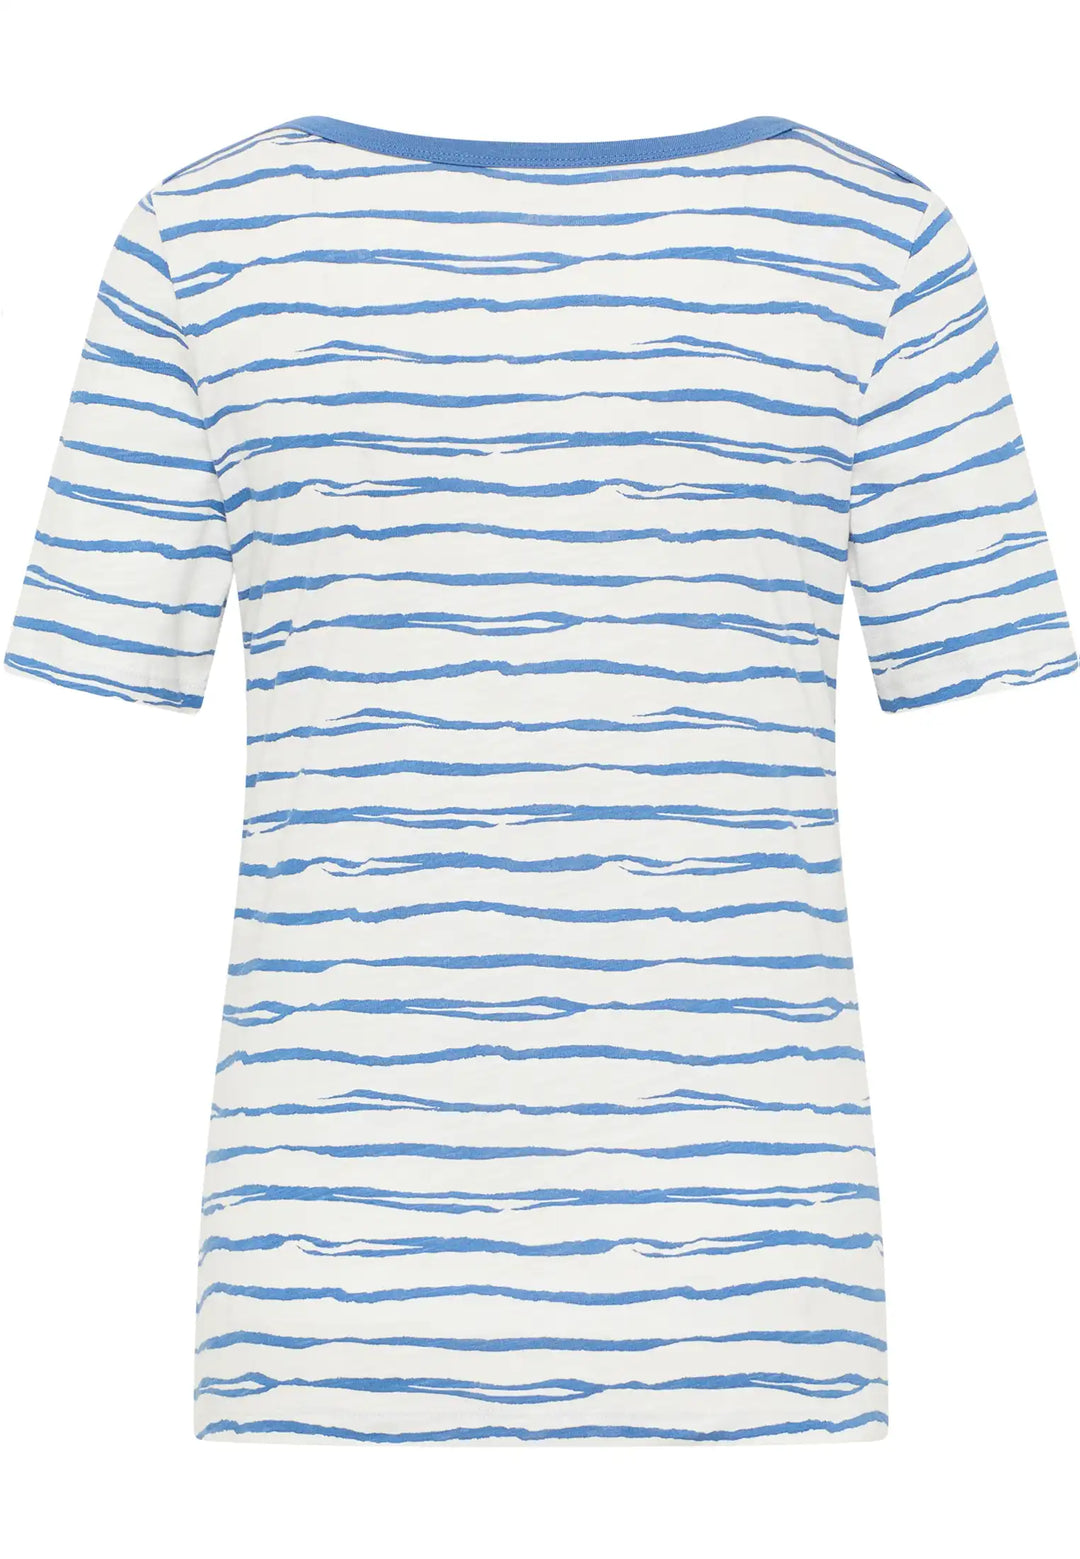 Back view of a top with sky blue wavy stripes on a white background, encapsulating a serene maritime vibe with short sleeves and a relaxed fit, style 57170042-850